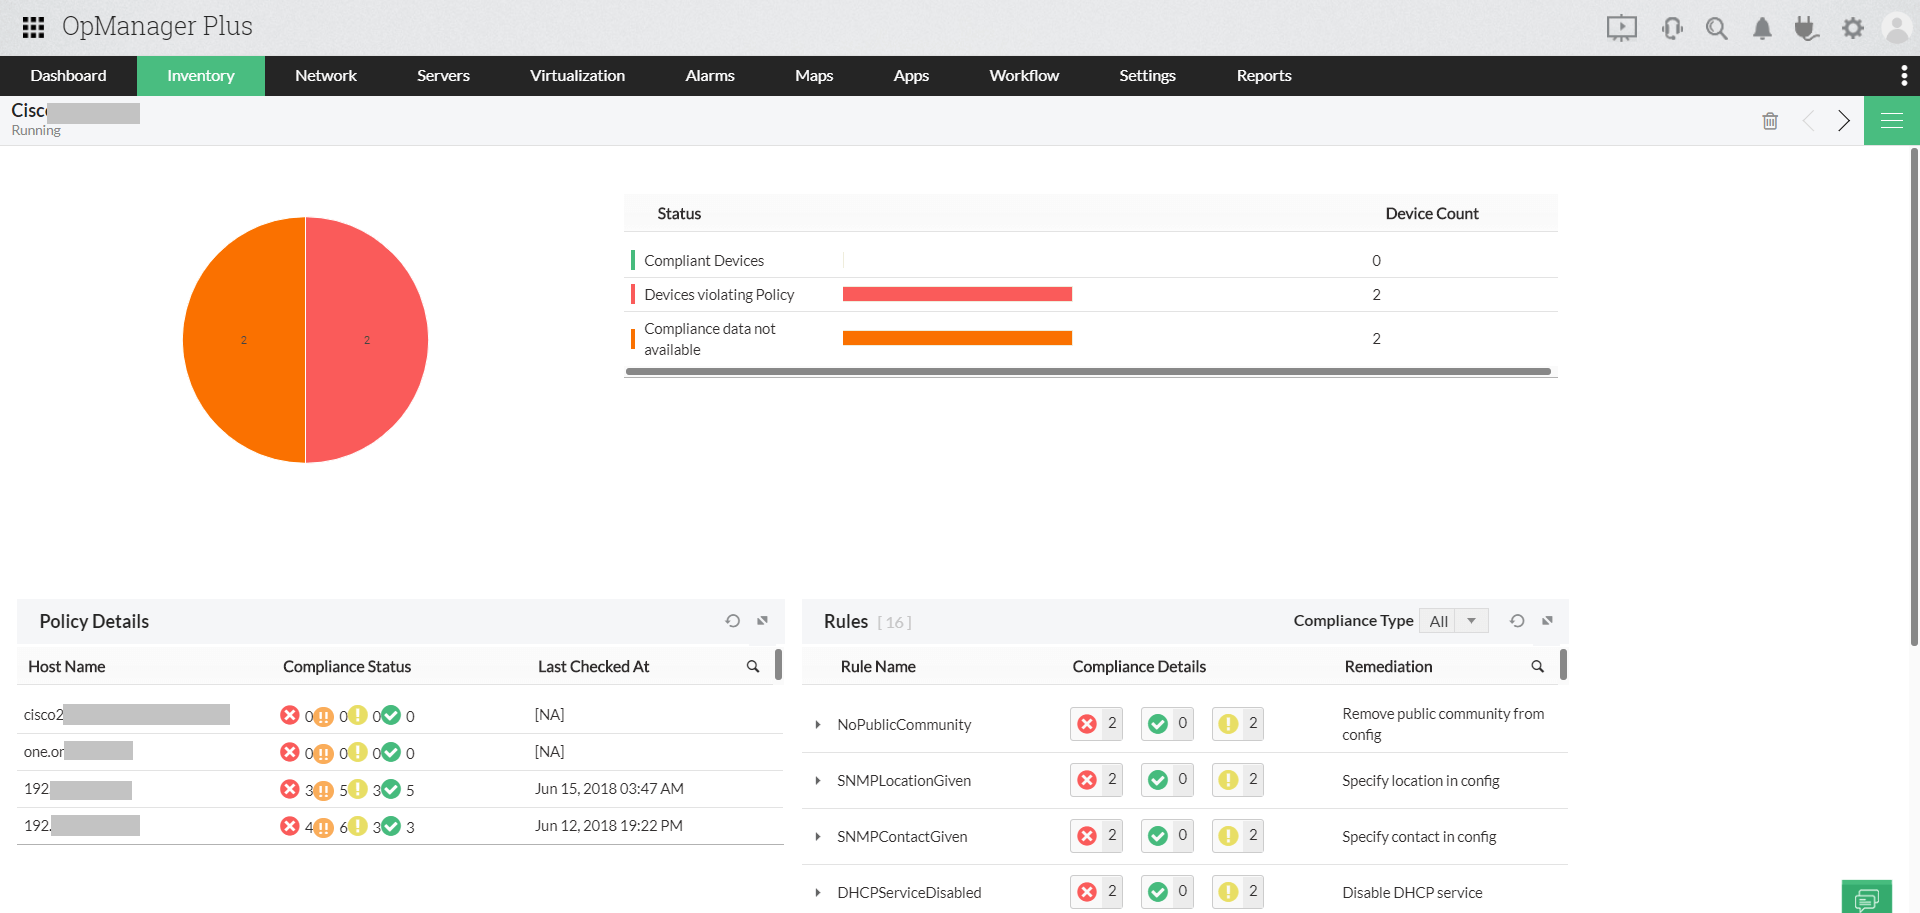 IT Infrastructure Management System - ManageEngine OpManager Plus